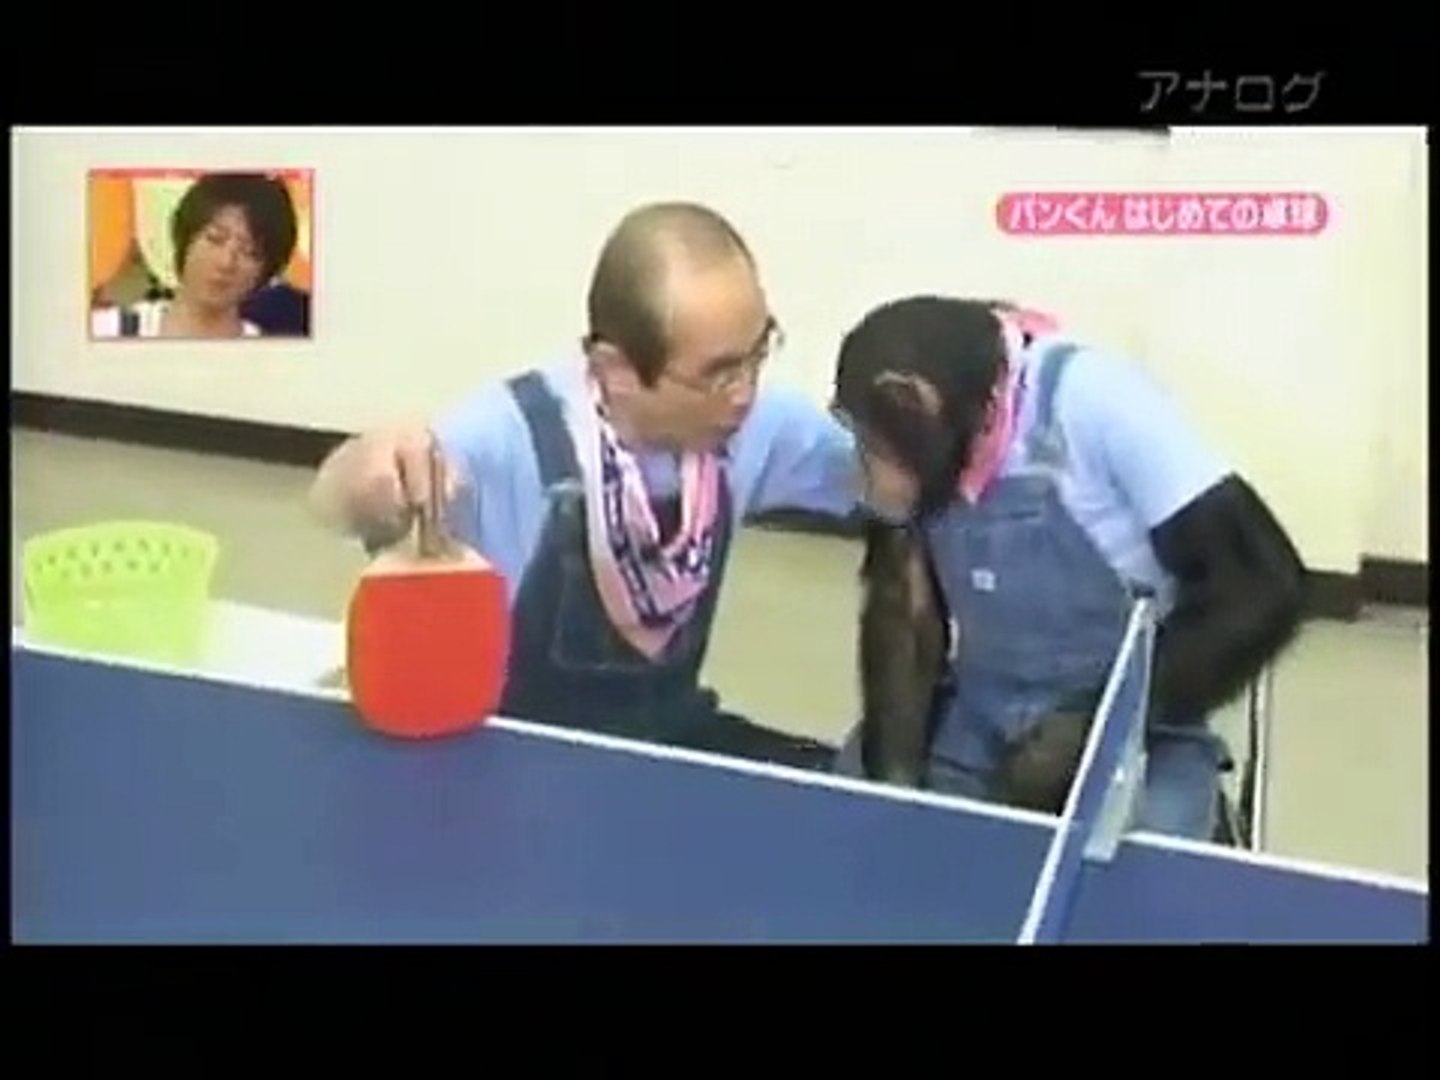 Dunya News-Chimpanzee learning how to play table tennis